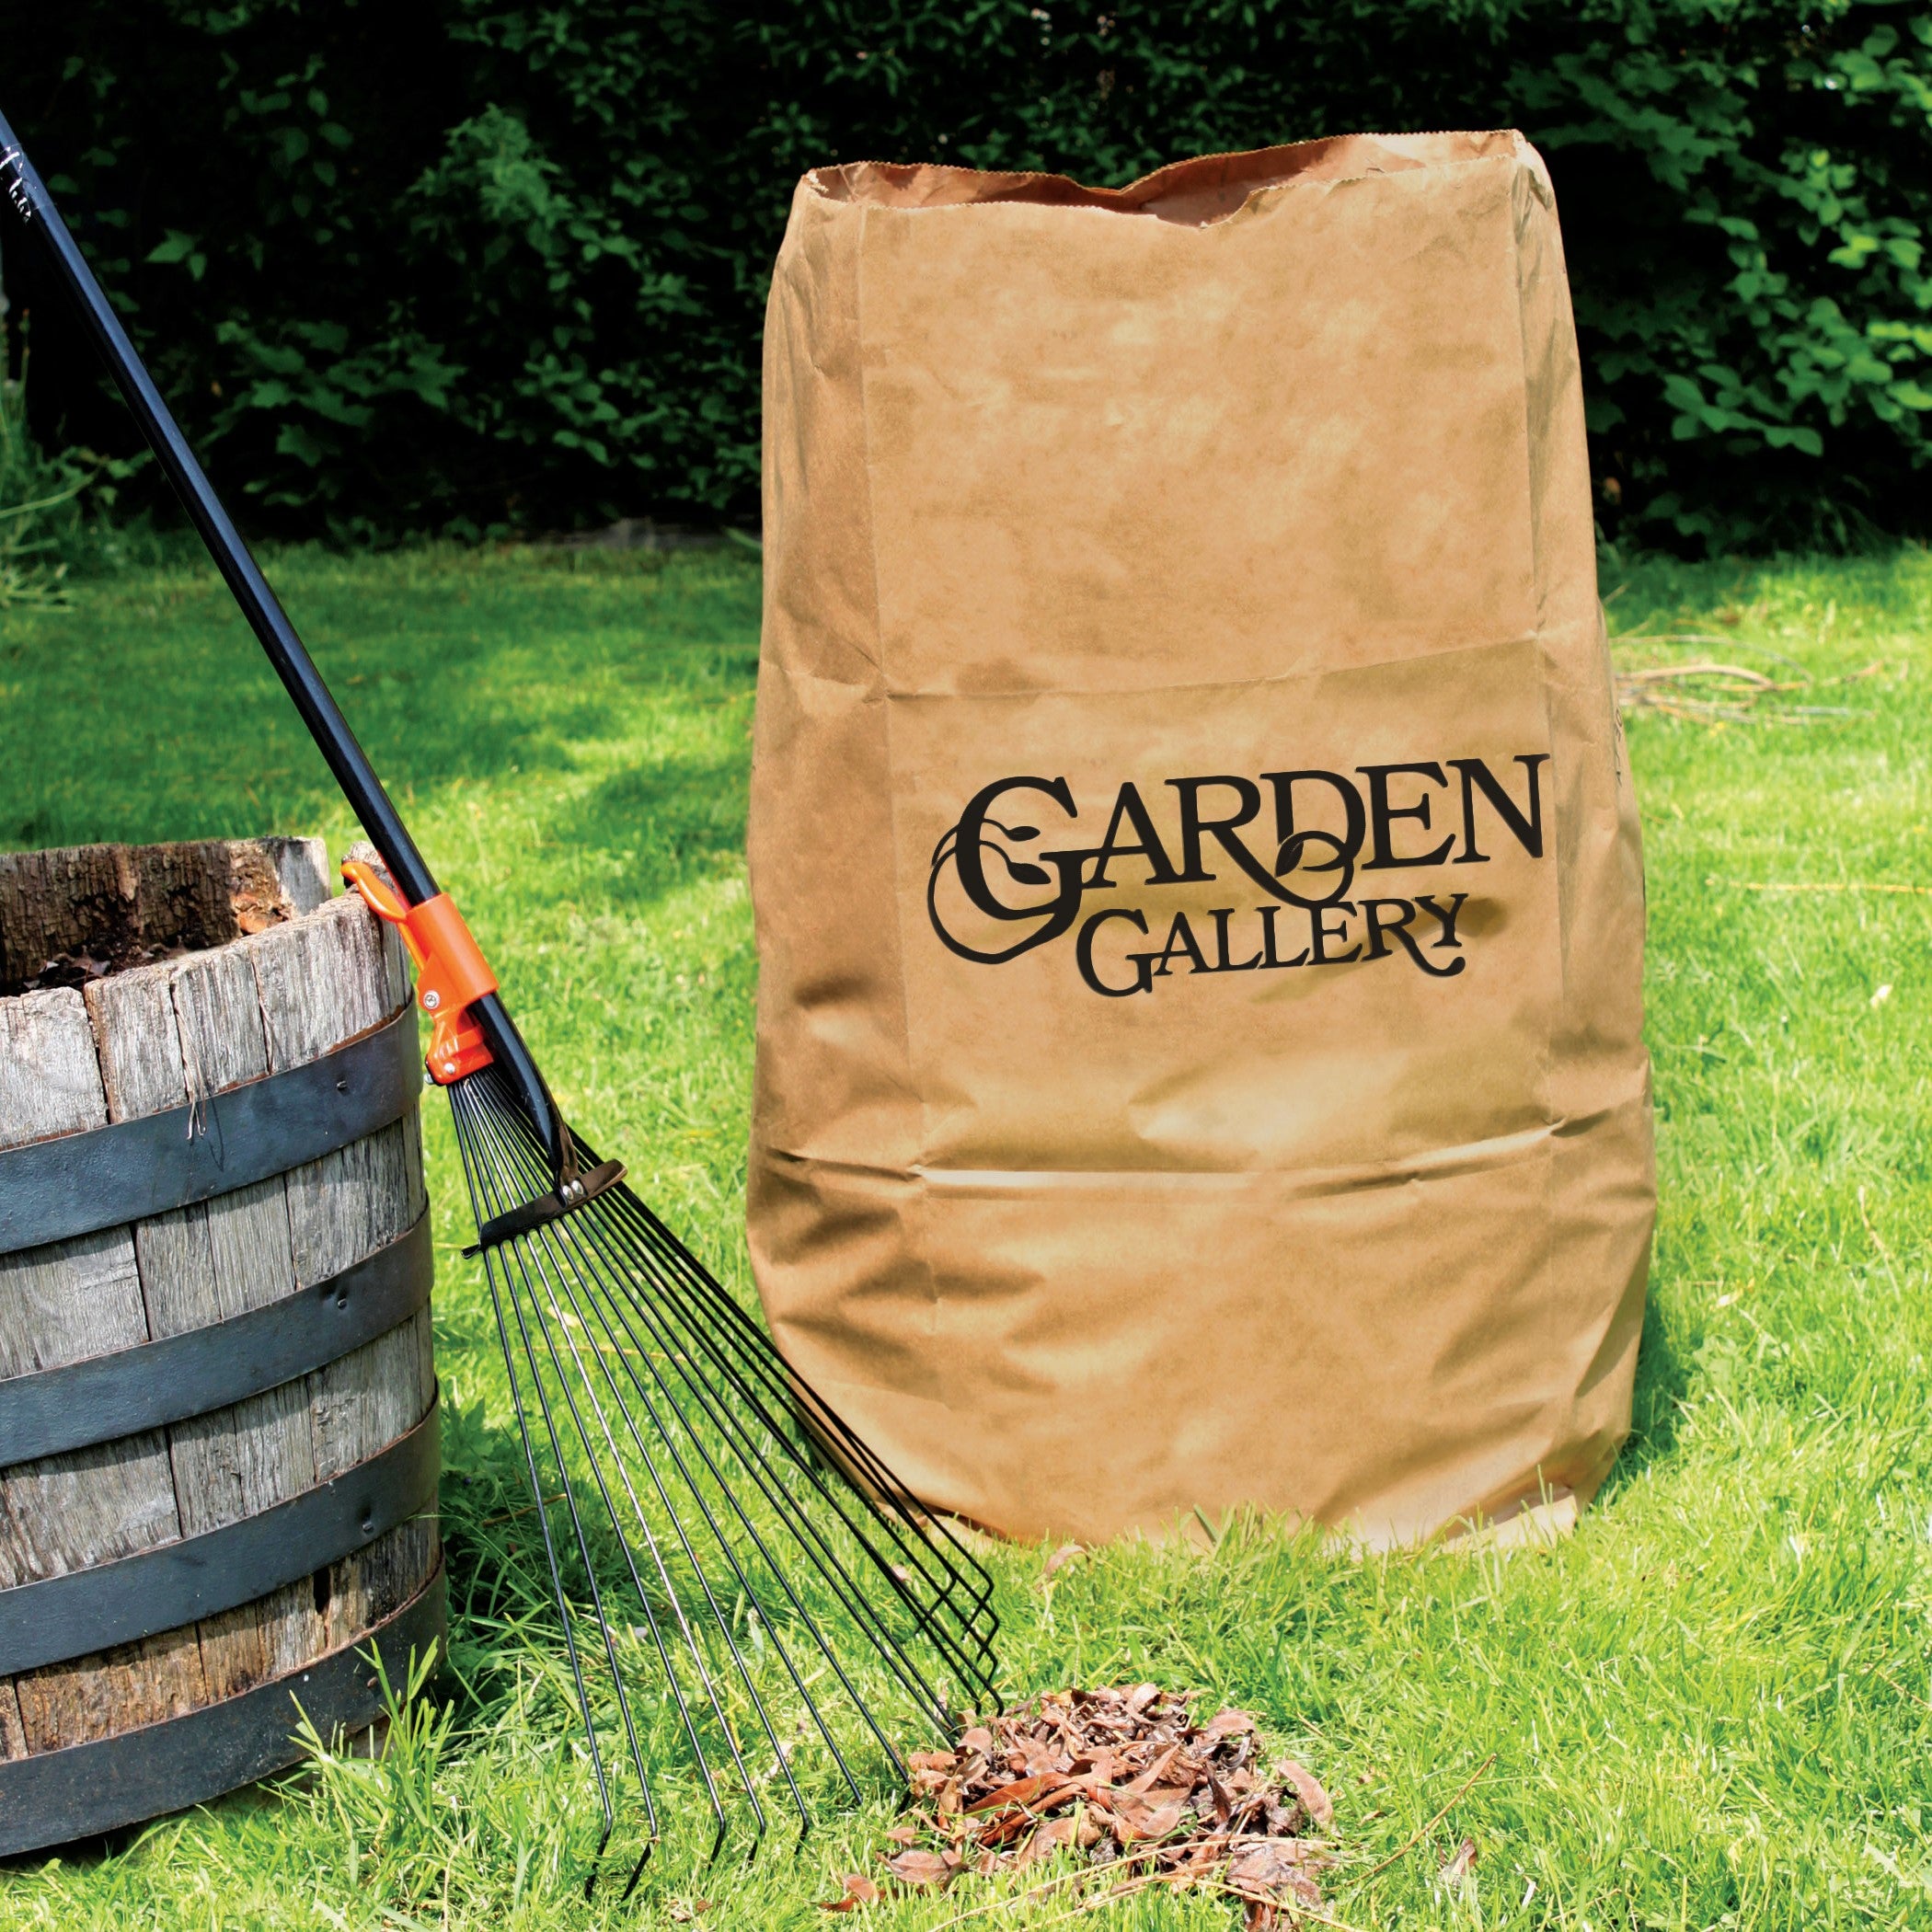 Garden Gallery Products